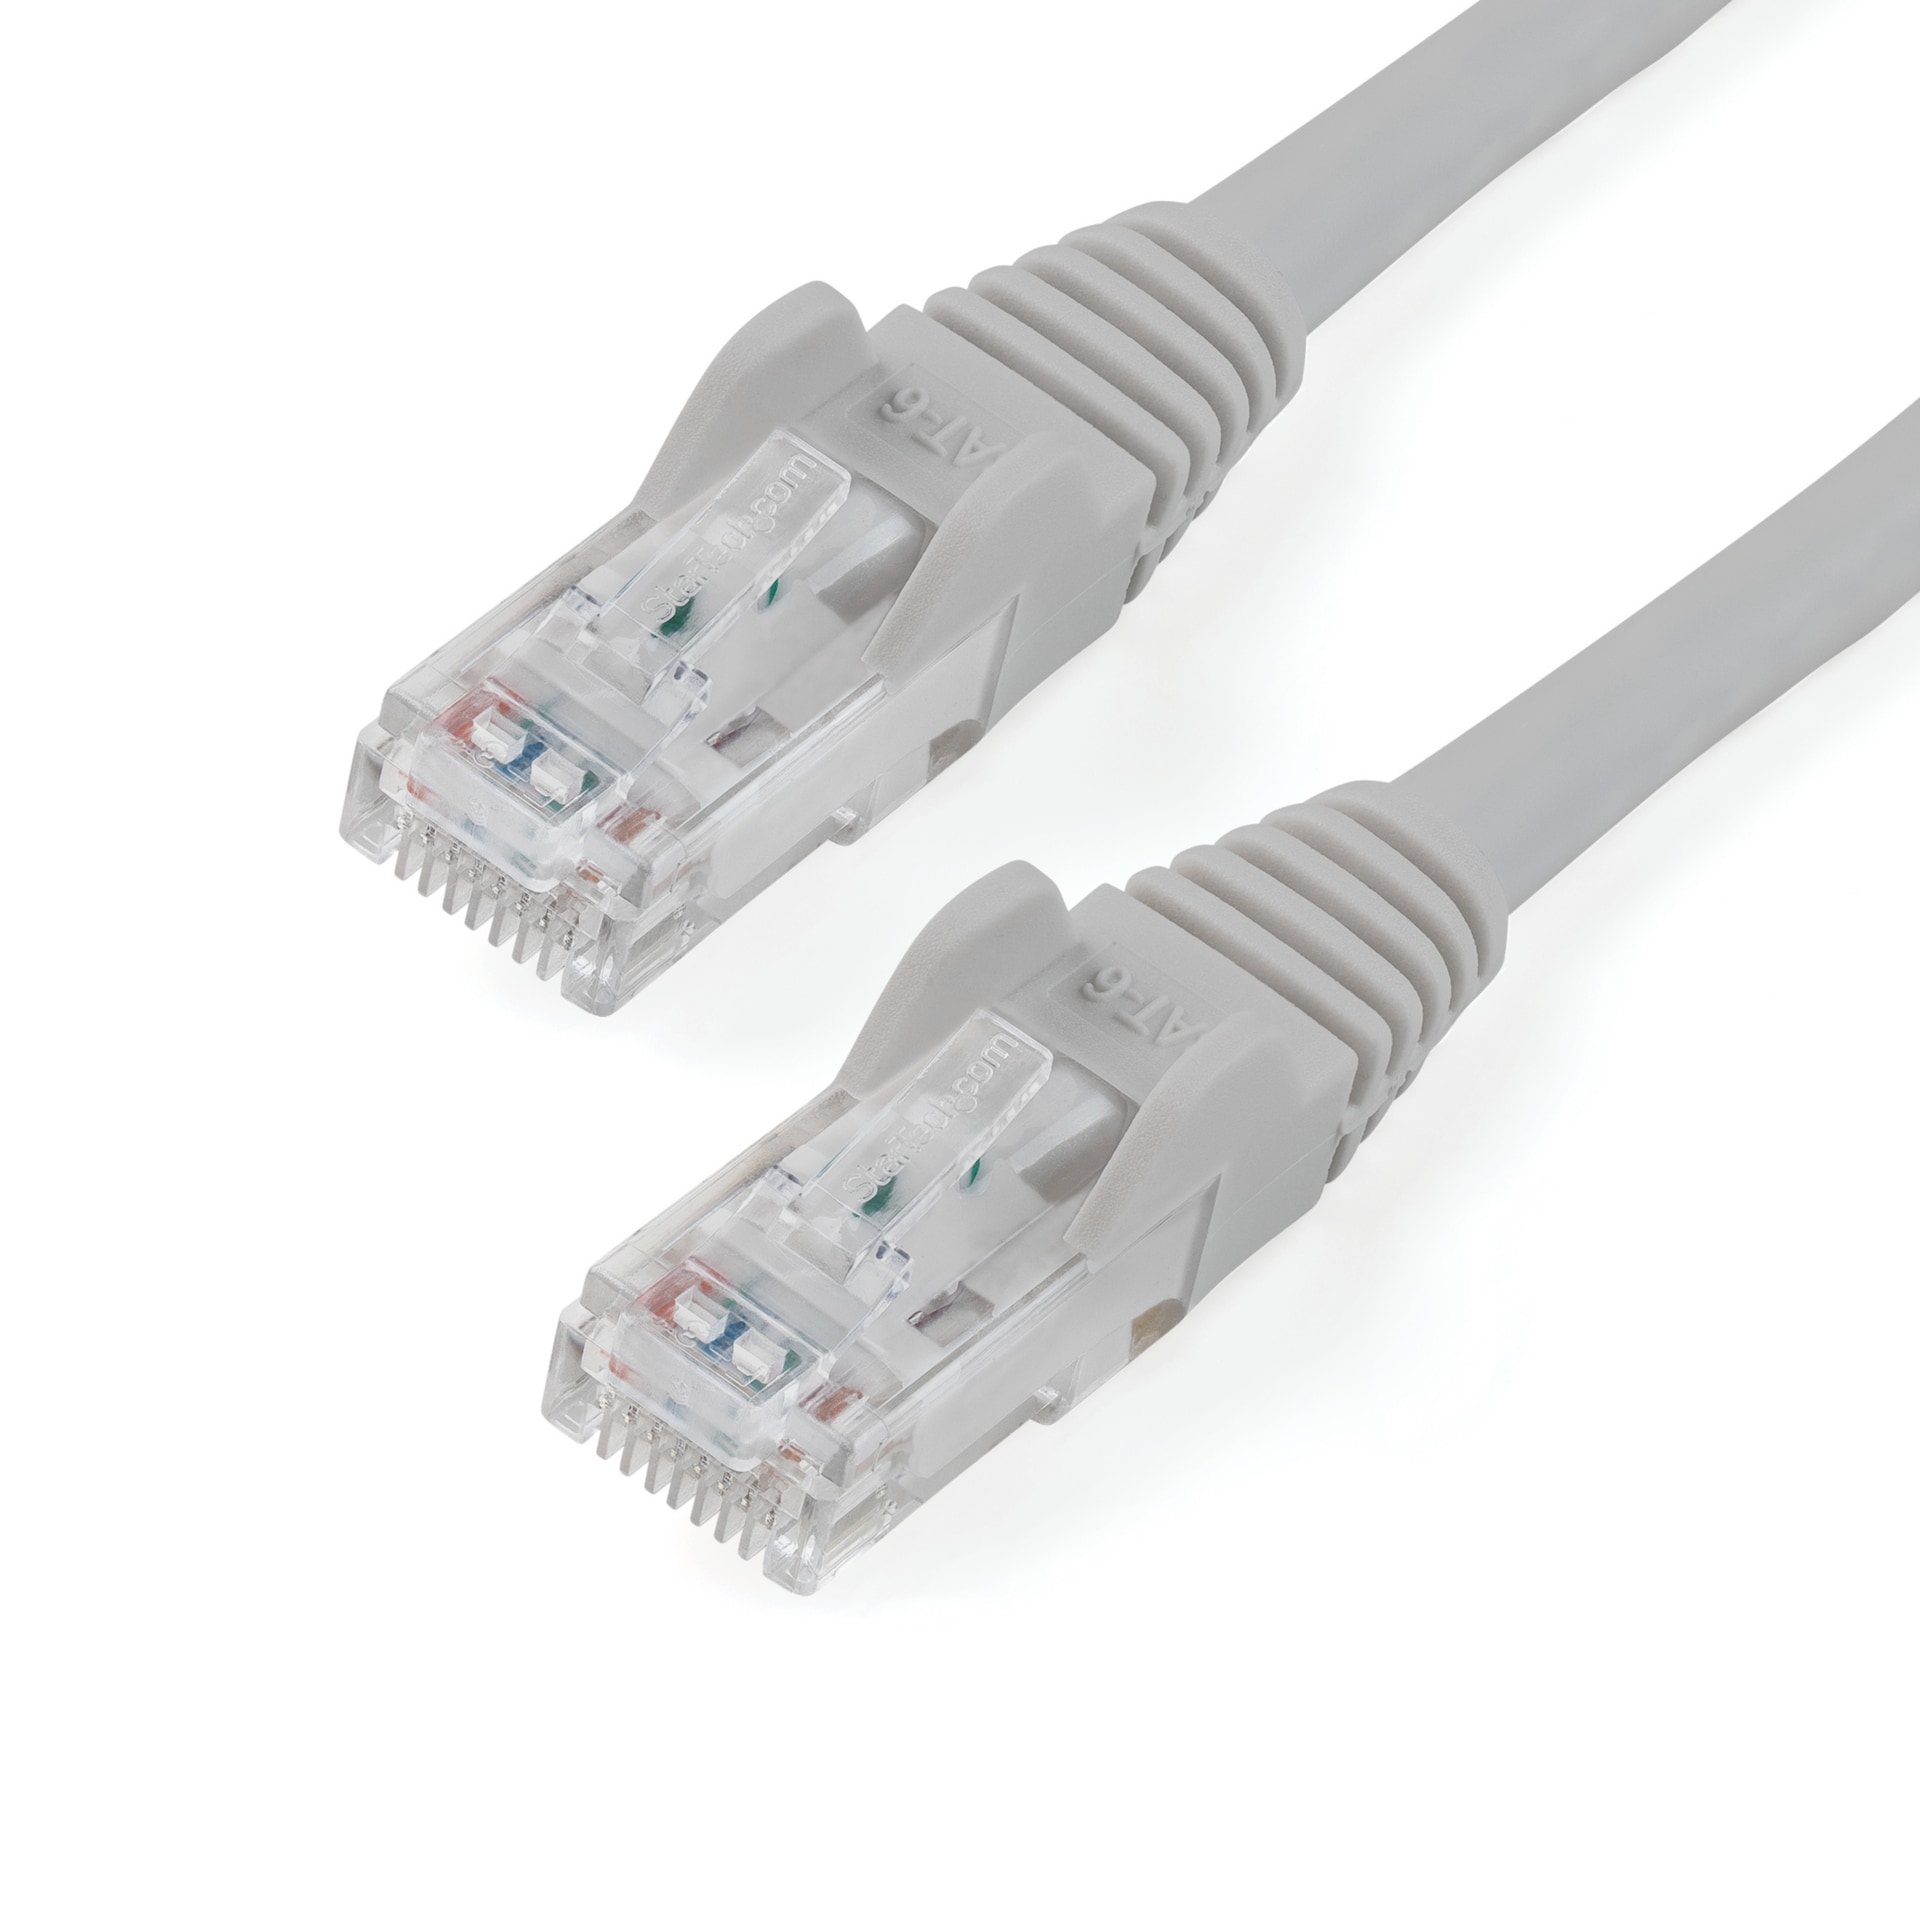 StarTech.com 20ft CAT6 Ethernet Cable Gray Snagless UTP CAT 6 Gigabit Cord/Wire 100W PoE 650MHz